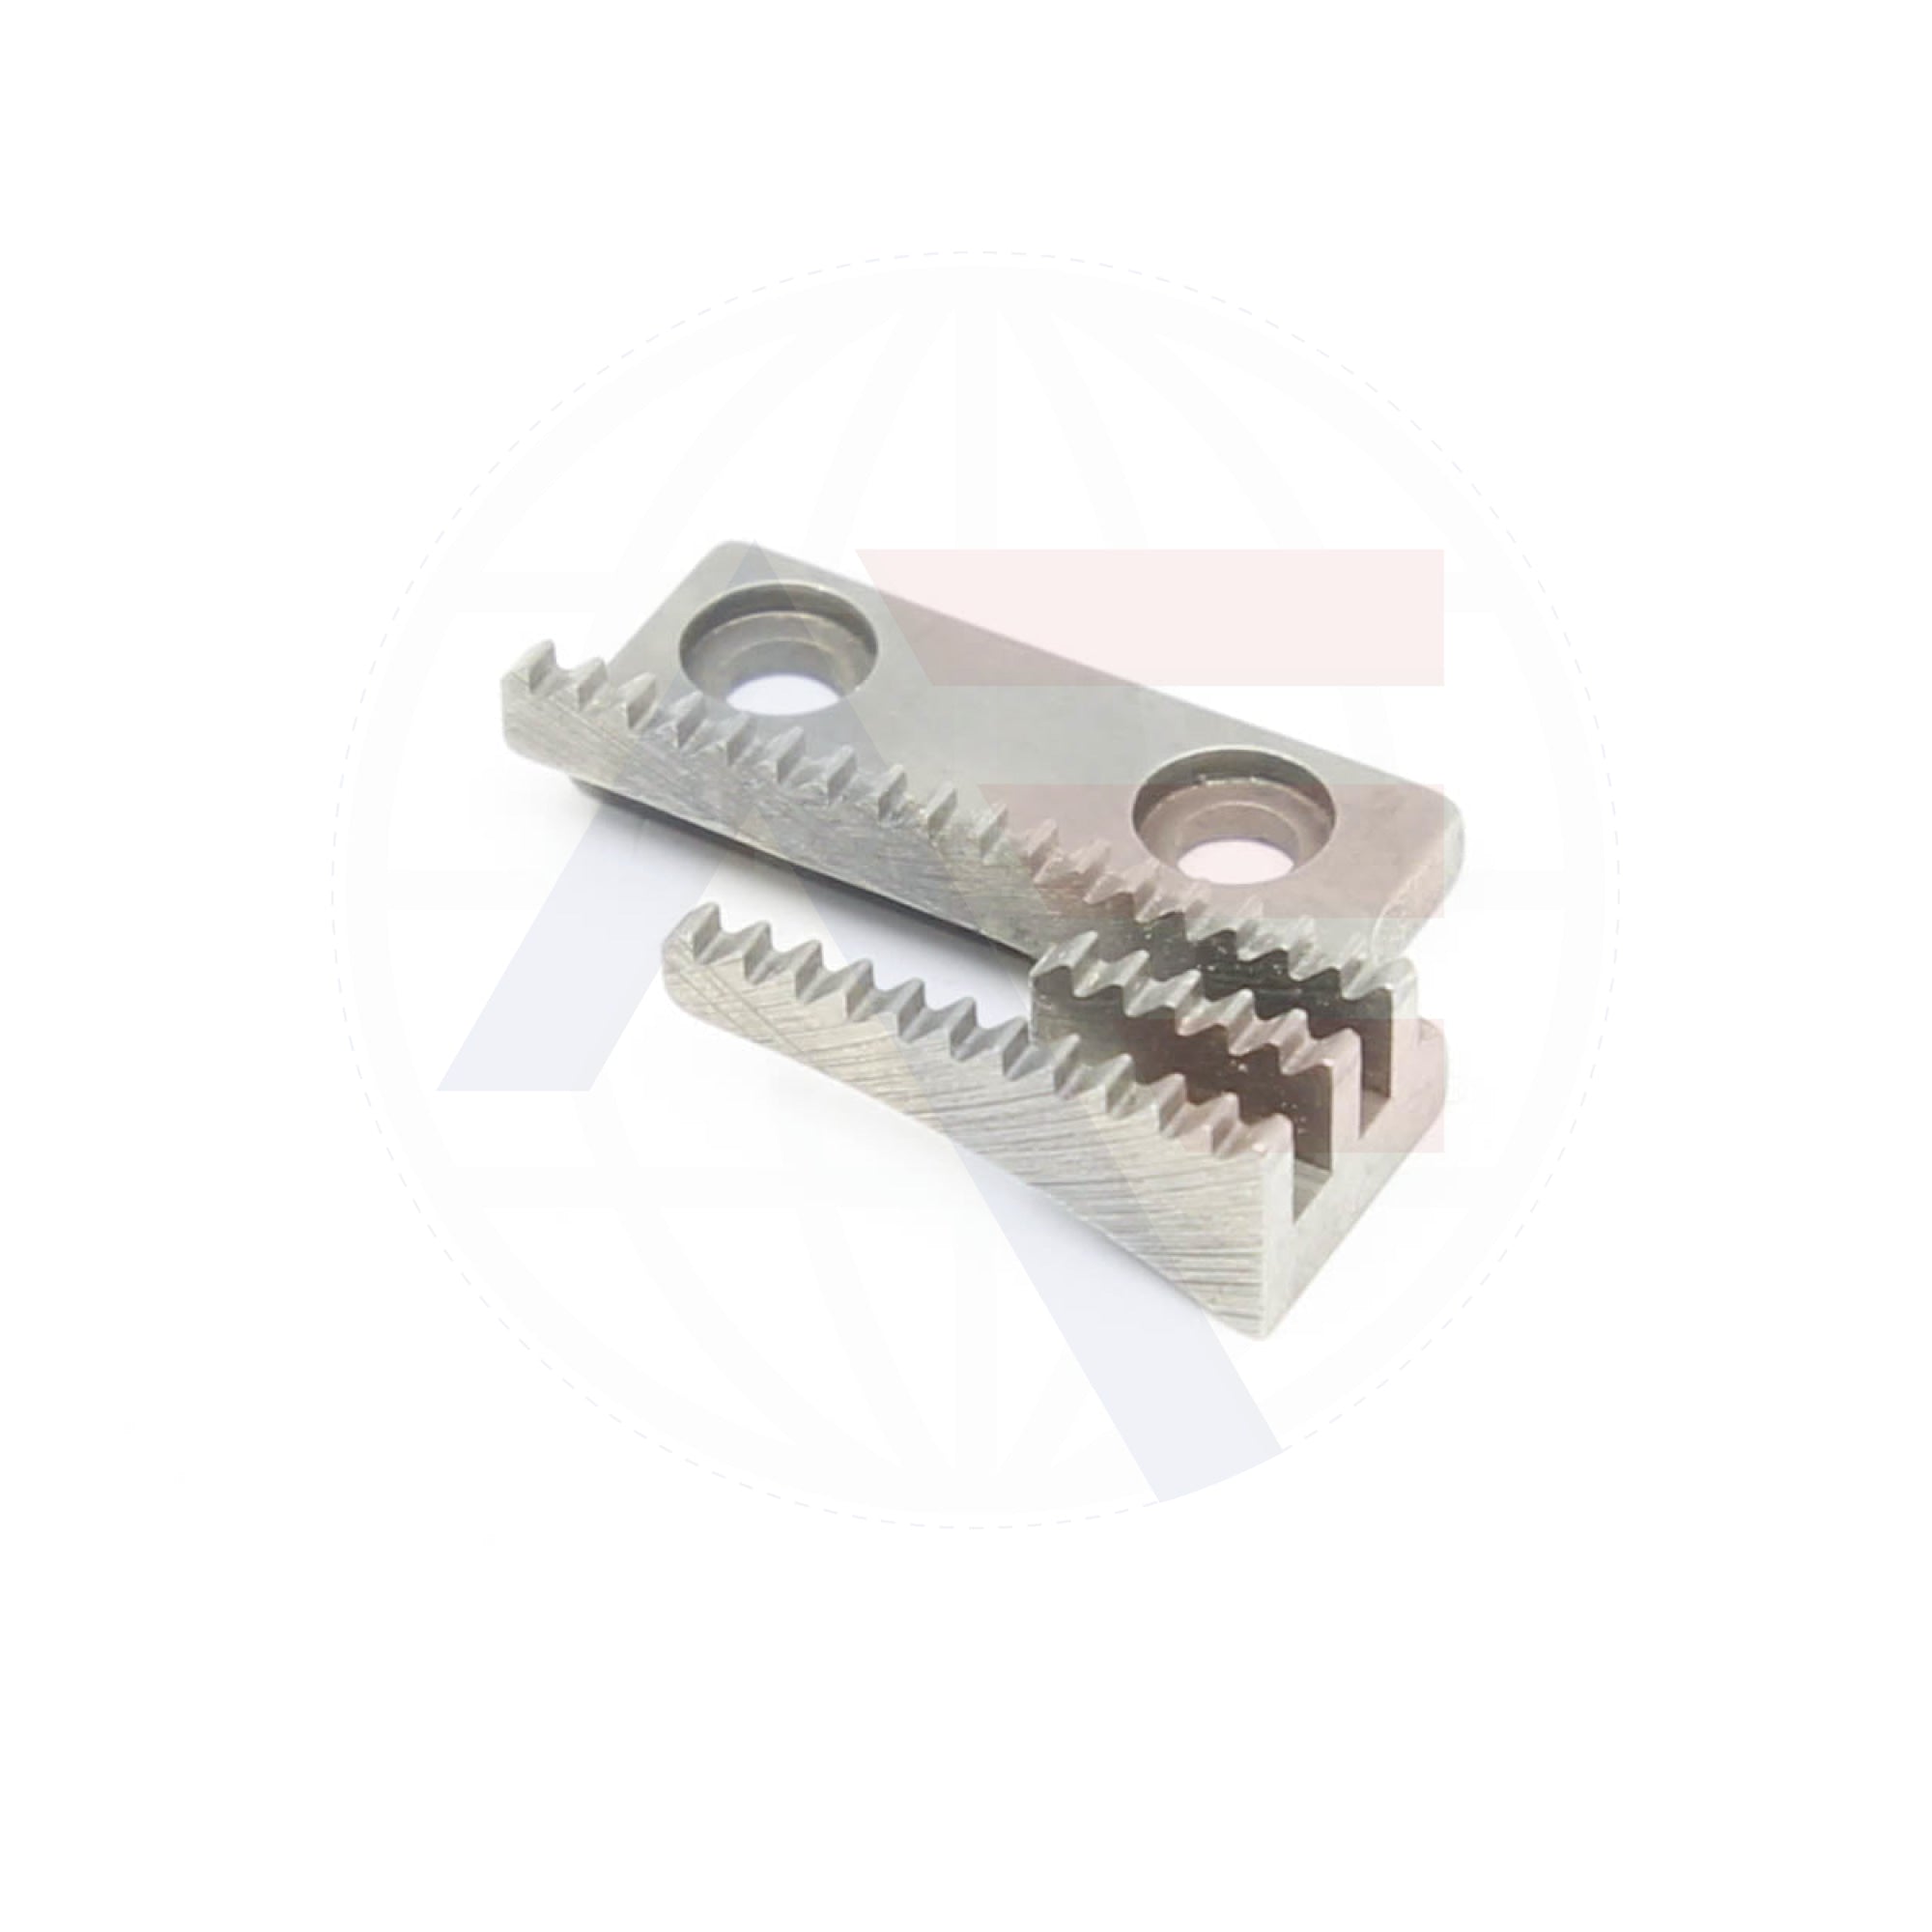 40101949 Feed Dog Sewing Machine Spare Parts